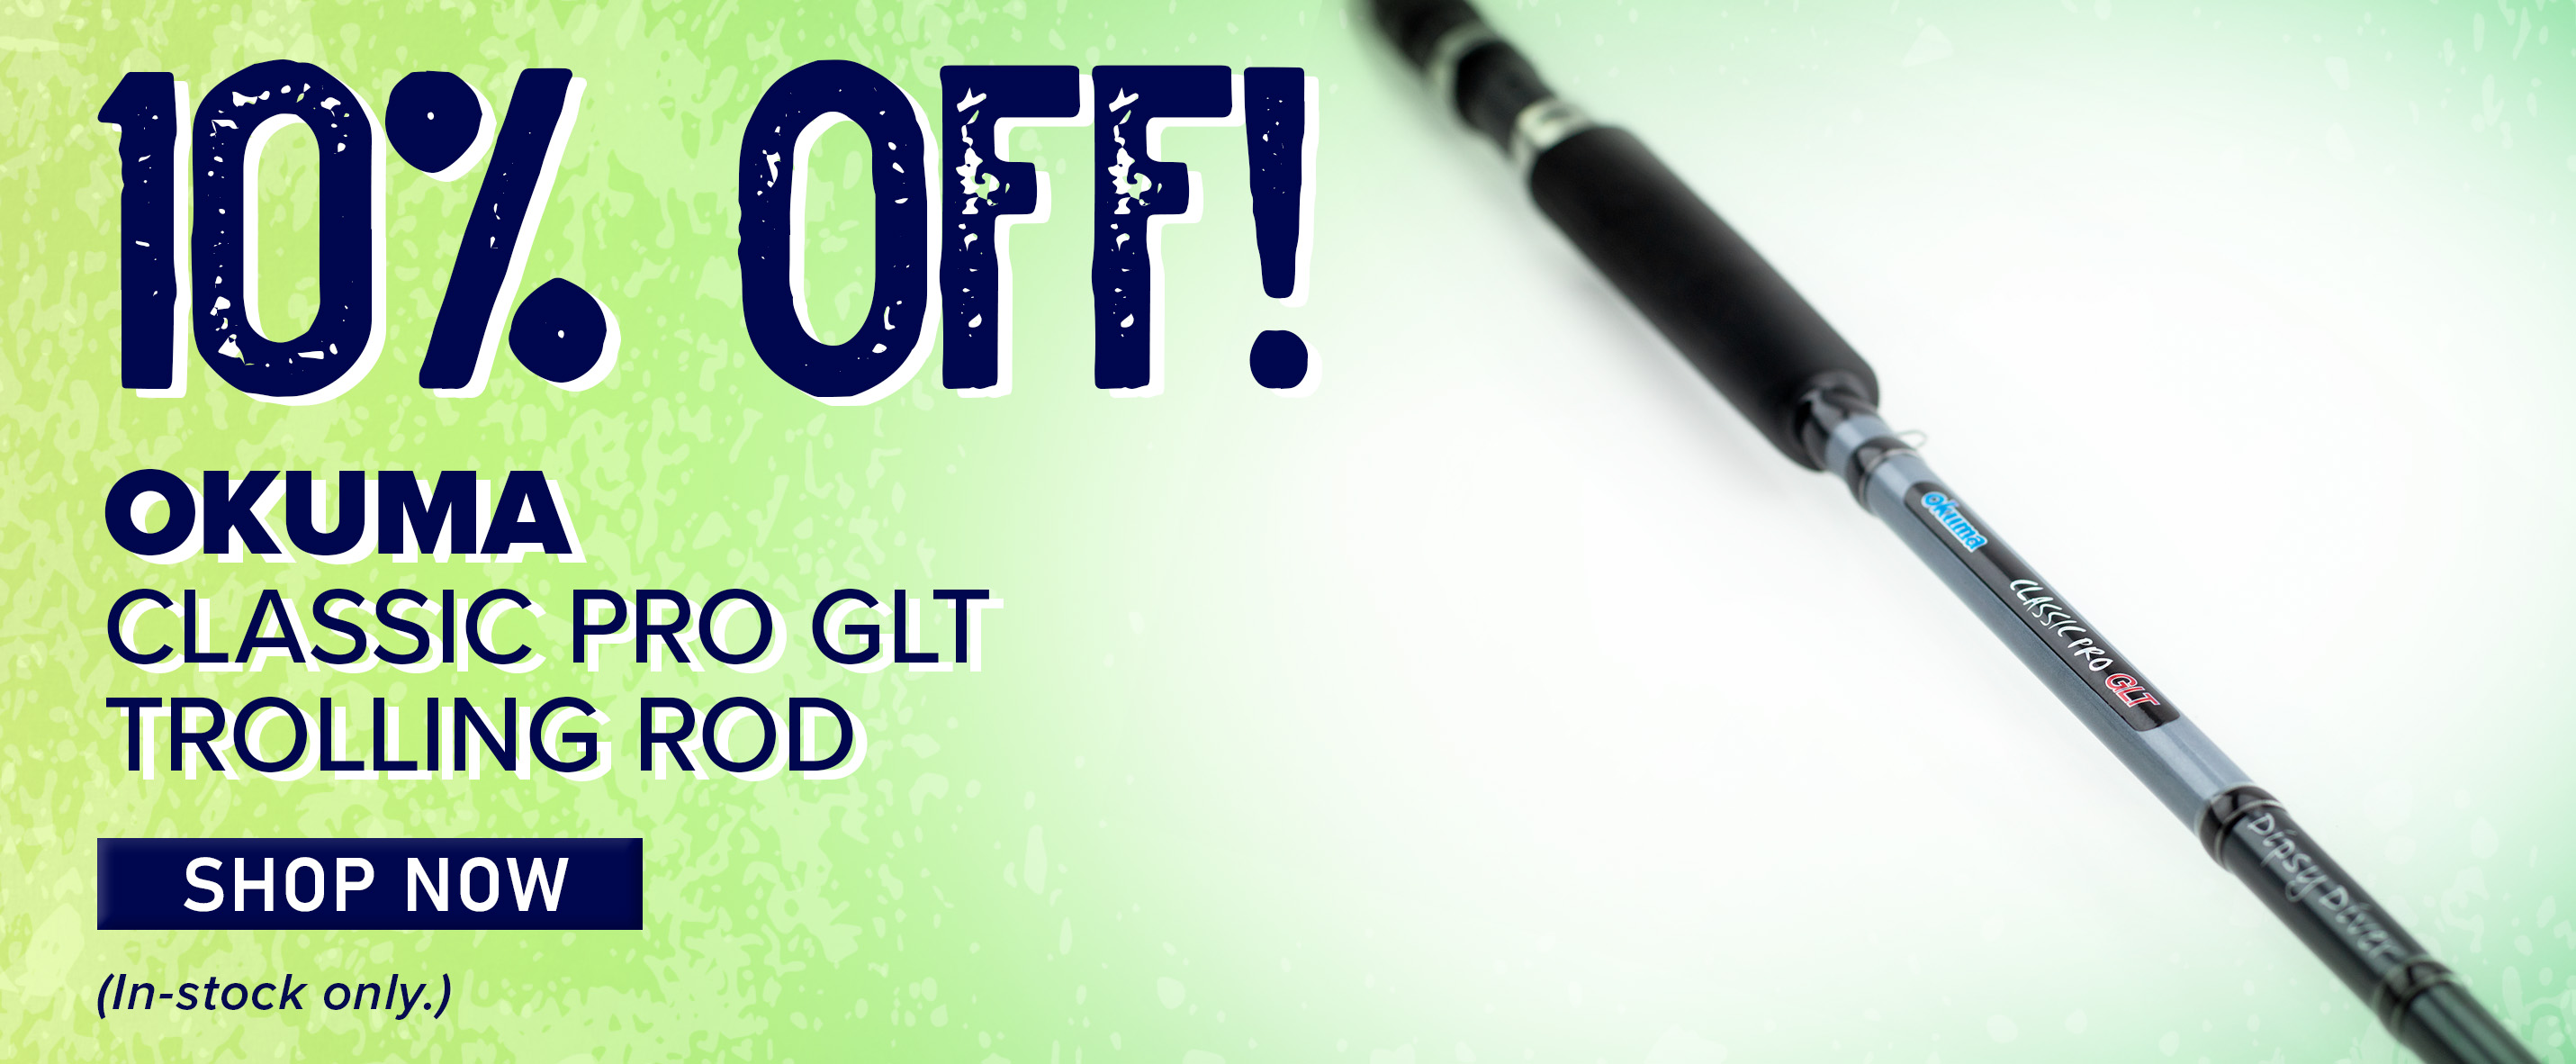 107, OFF! OKUMA CLASSIC PRO GLT TROLLING ROD SHOP NOW In-stock only. 